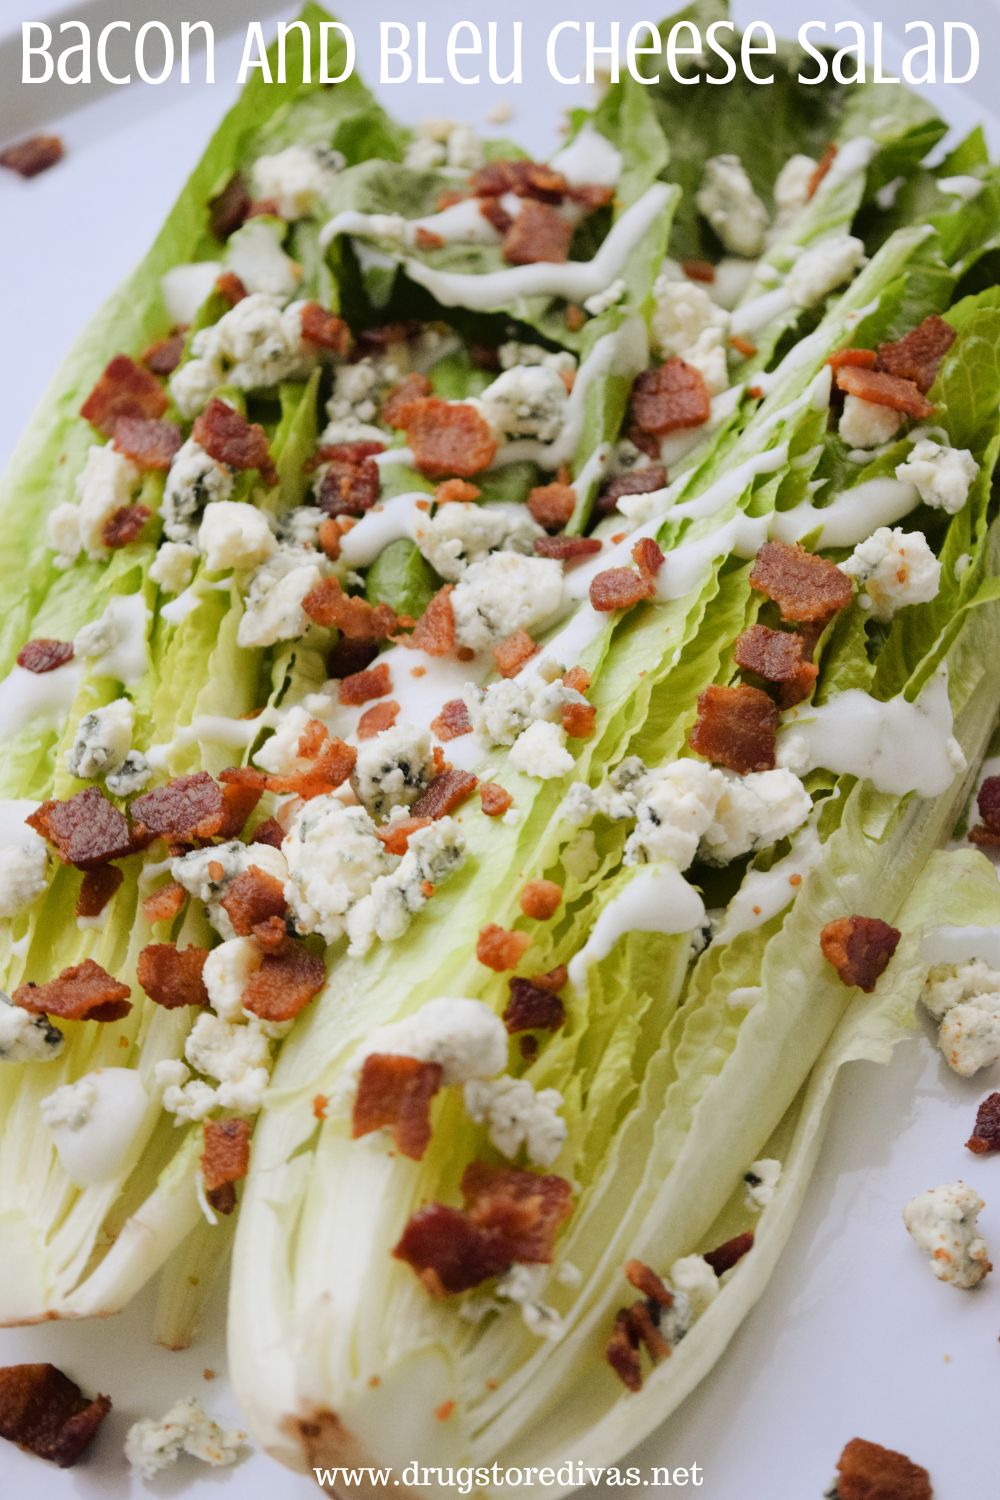 Romaine lettuce on a white tray with bleu cheese crumbles, crumbled bacon, and white dressing on top with the words 